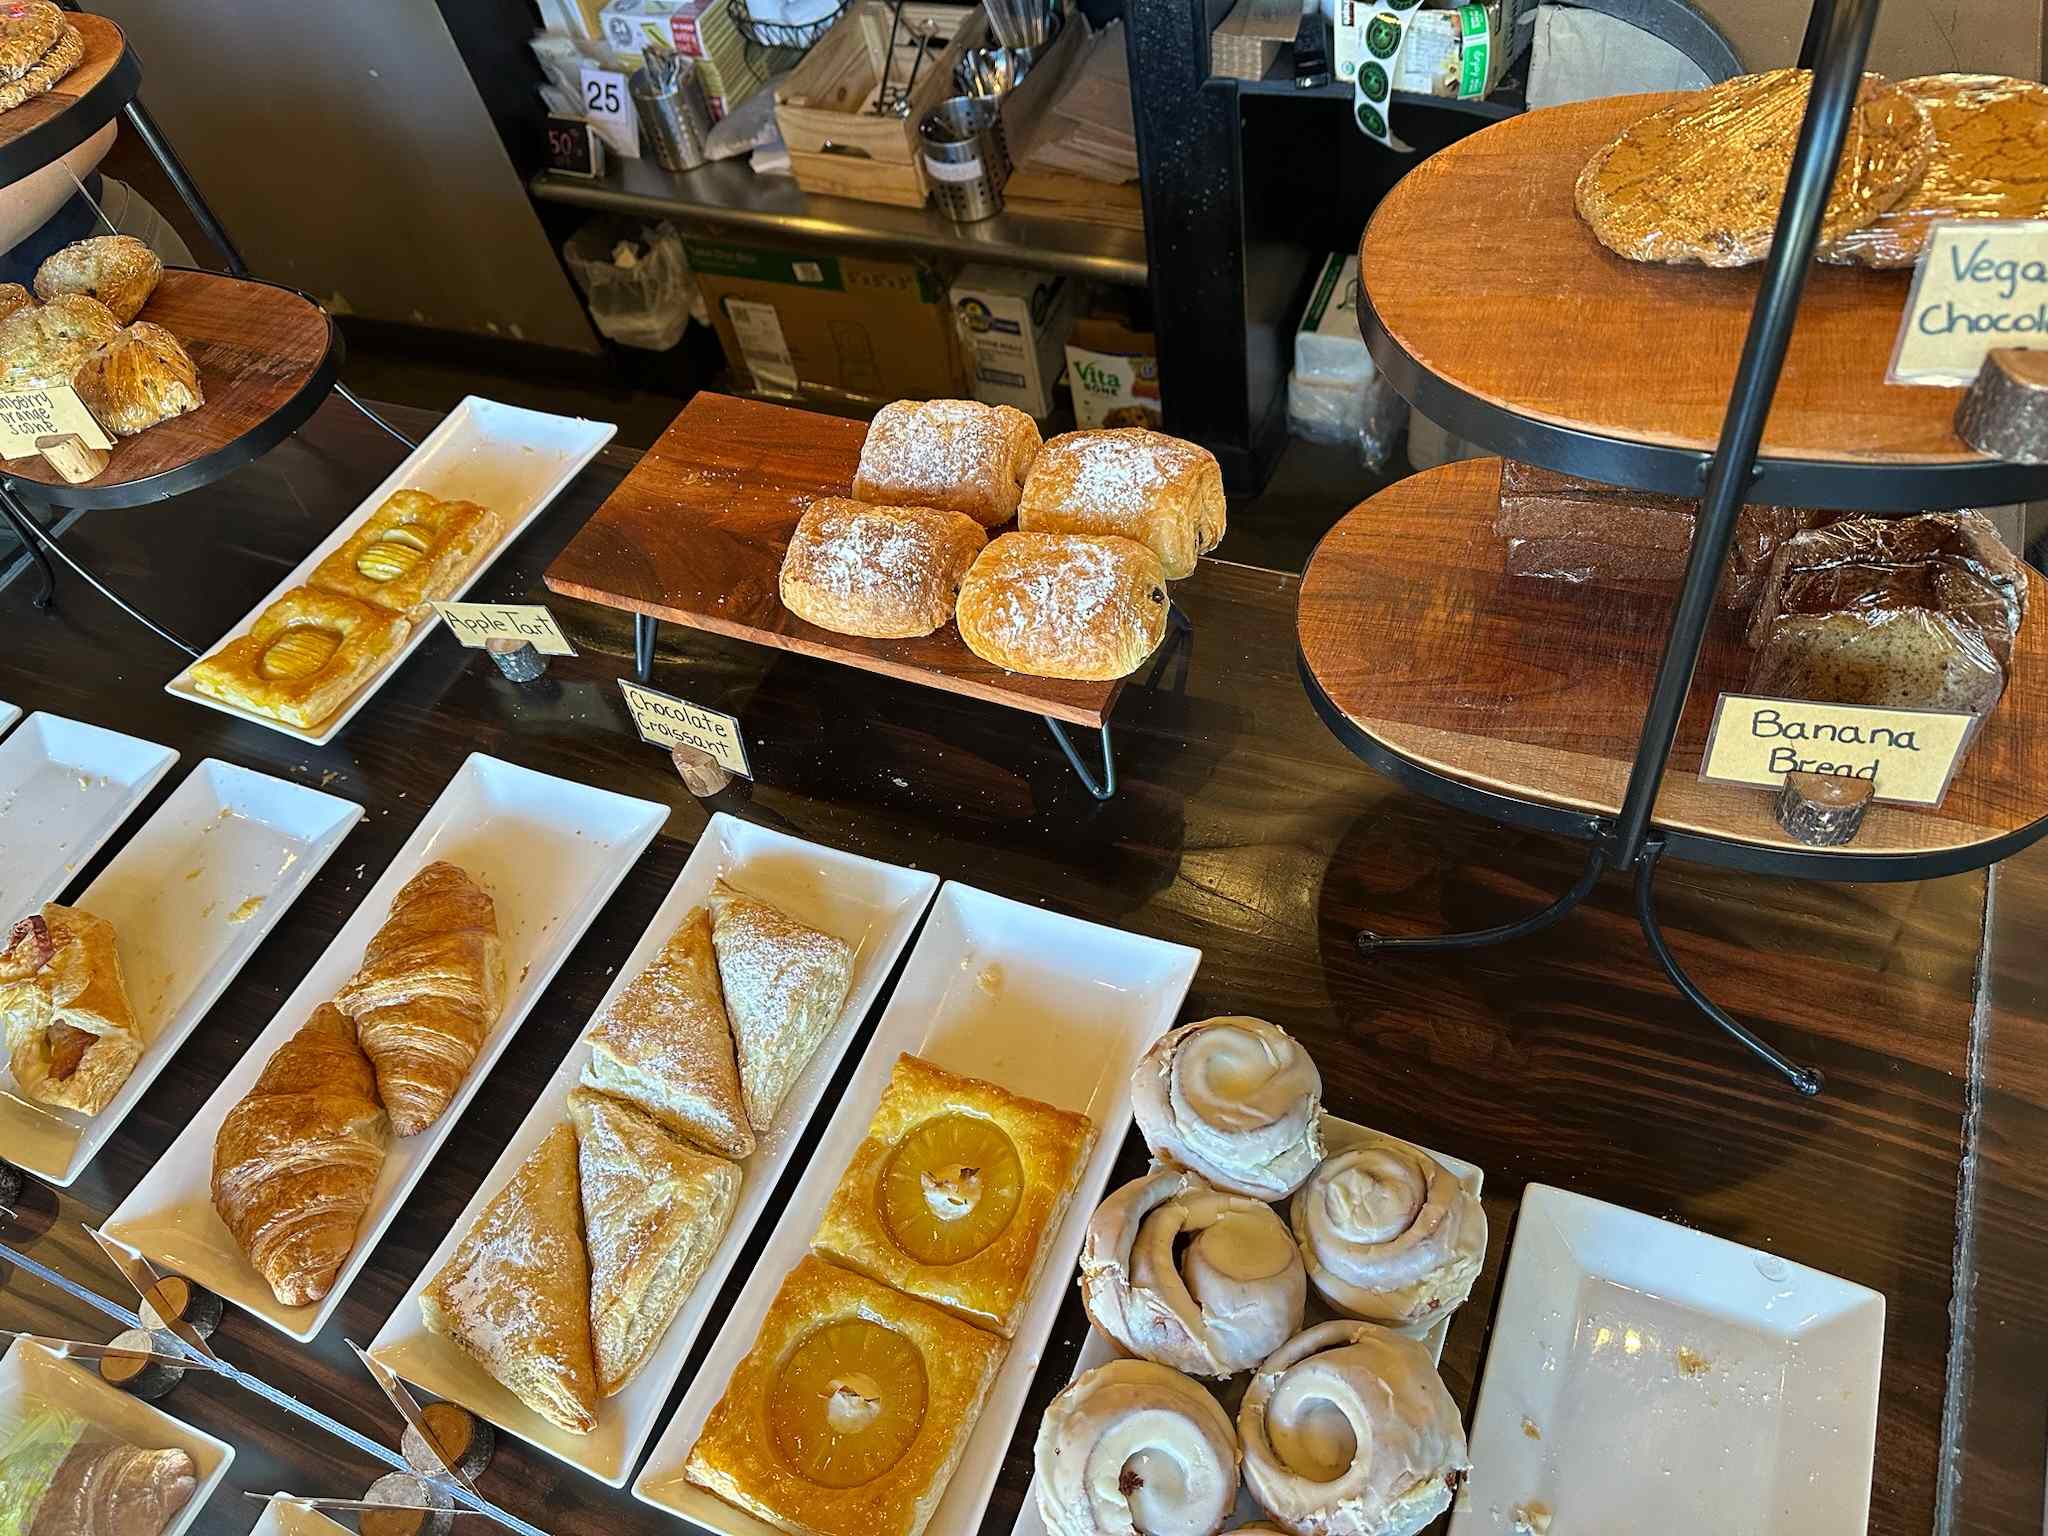 A display of pastries at Bequest Coffee.